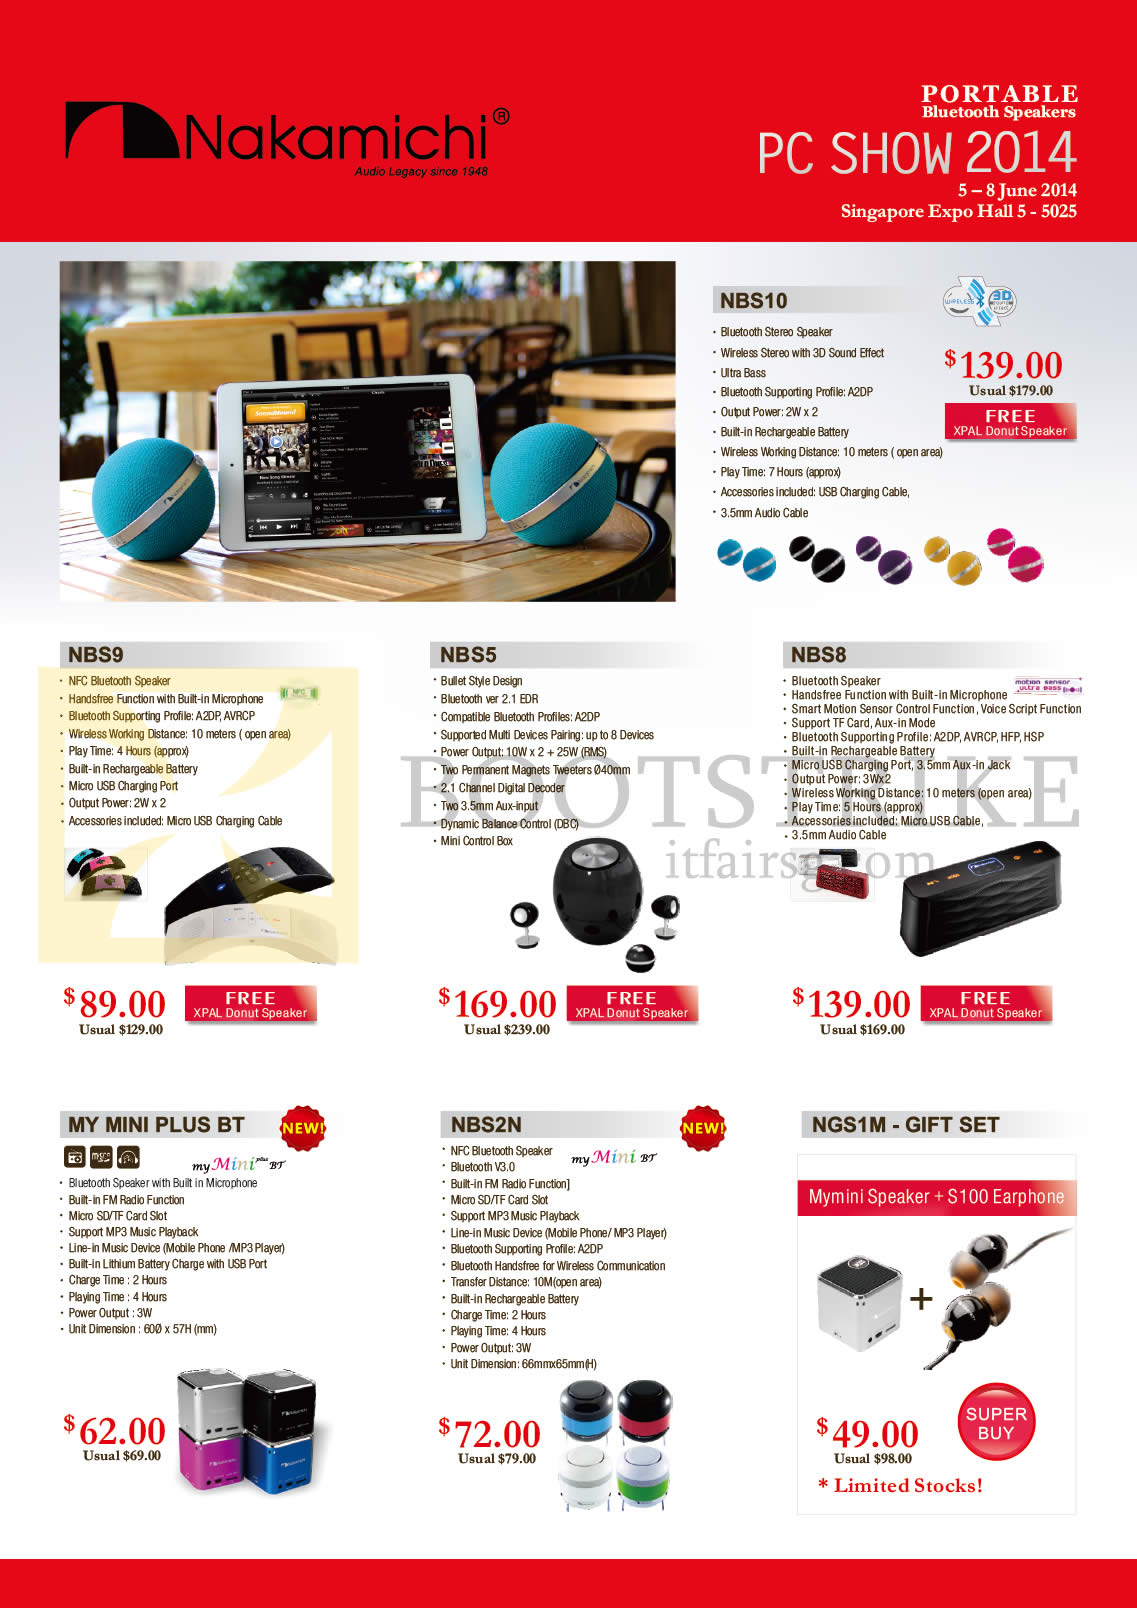 PC SHOW 2014 price list image brochure of Sprint-Cass Nakamichi Bluetooth Speakers NBS9, NBS5, NBS8, NBS2N, My Mini Plus BT, NGS1M